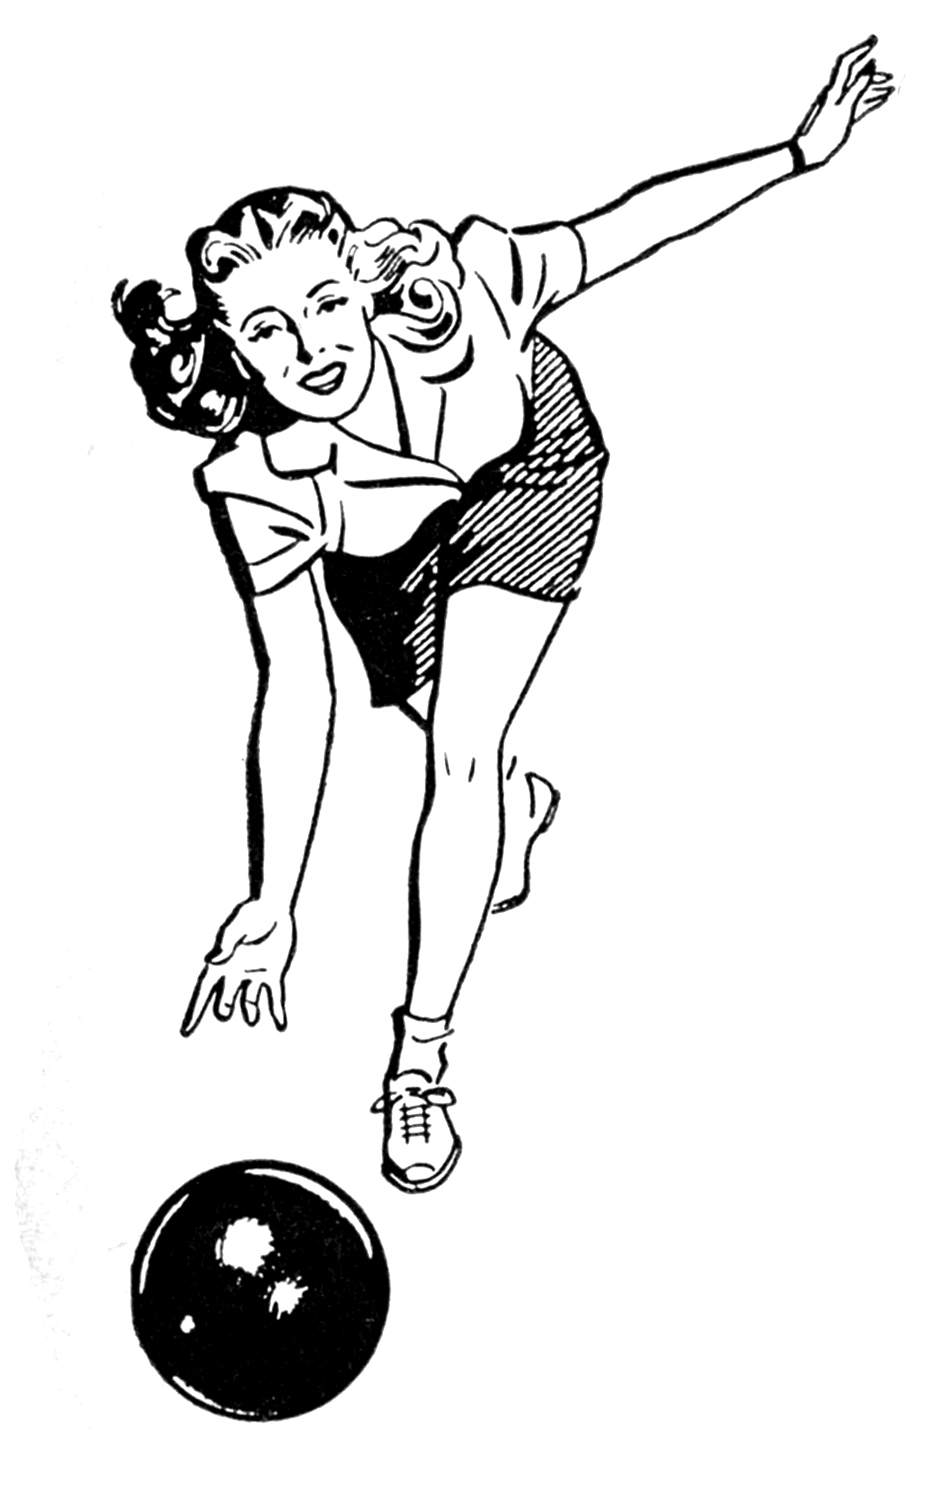 Retro Woman And Man Bowling The Graphics Clipart